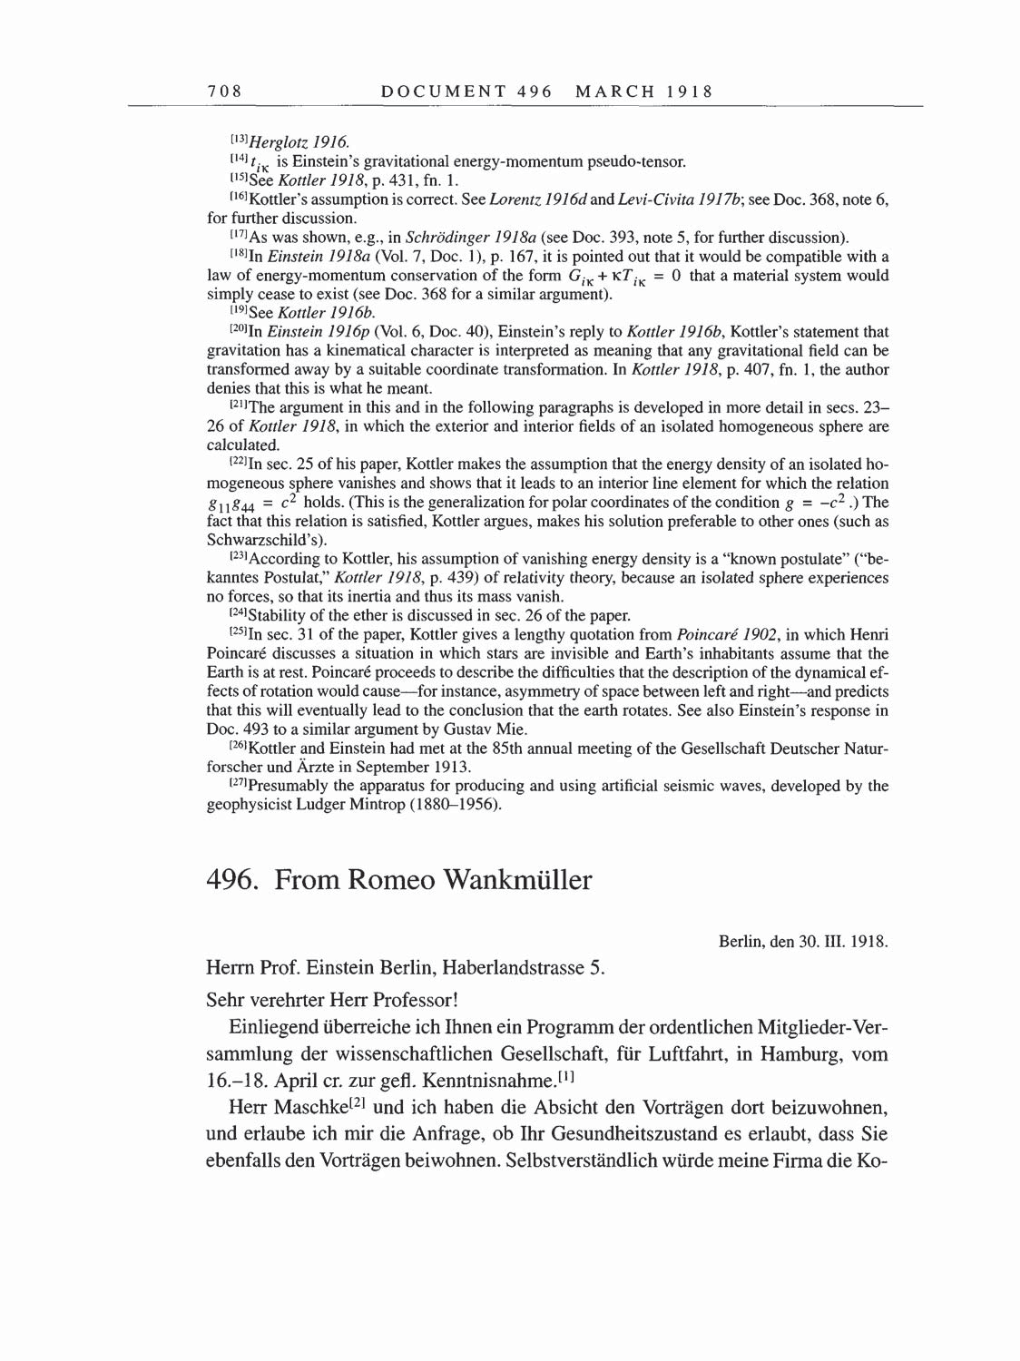 Volume 8, Part B: The Berlin Years: Correspondence 1918 page 708